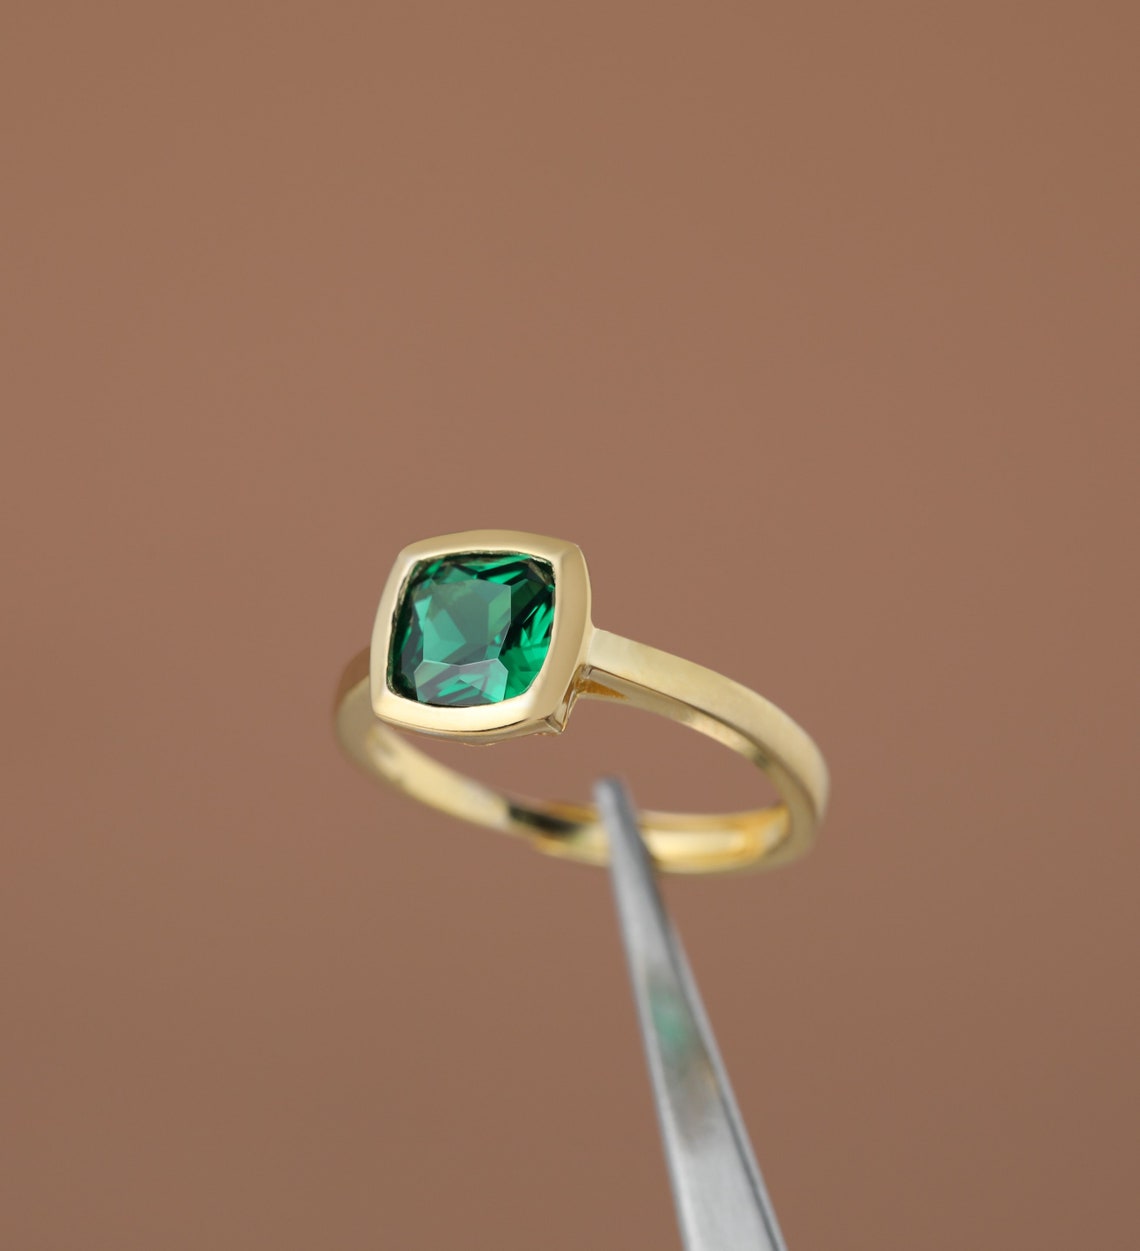 Vintage Emerald Engagement Ring - Gold Plated Sterling Silver - Bieauli 